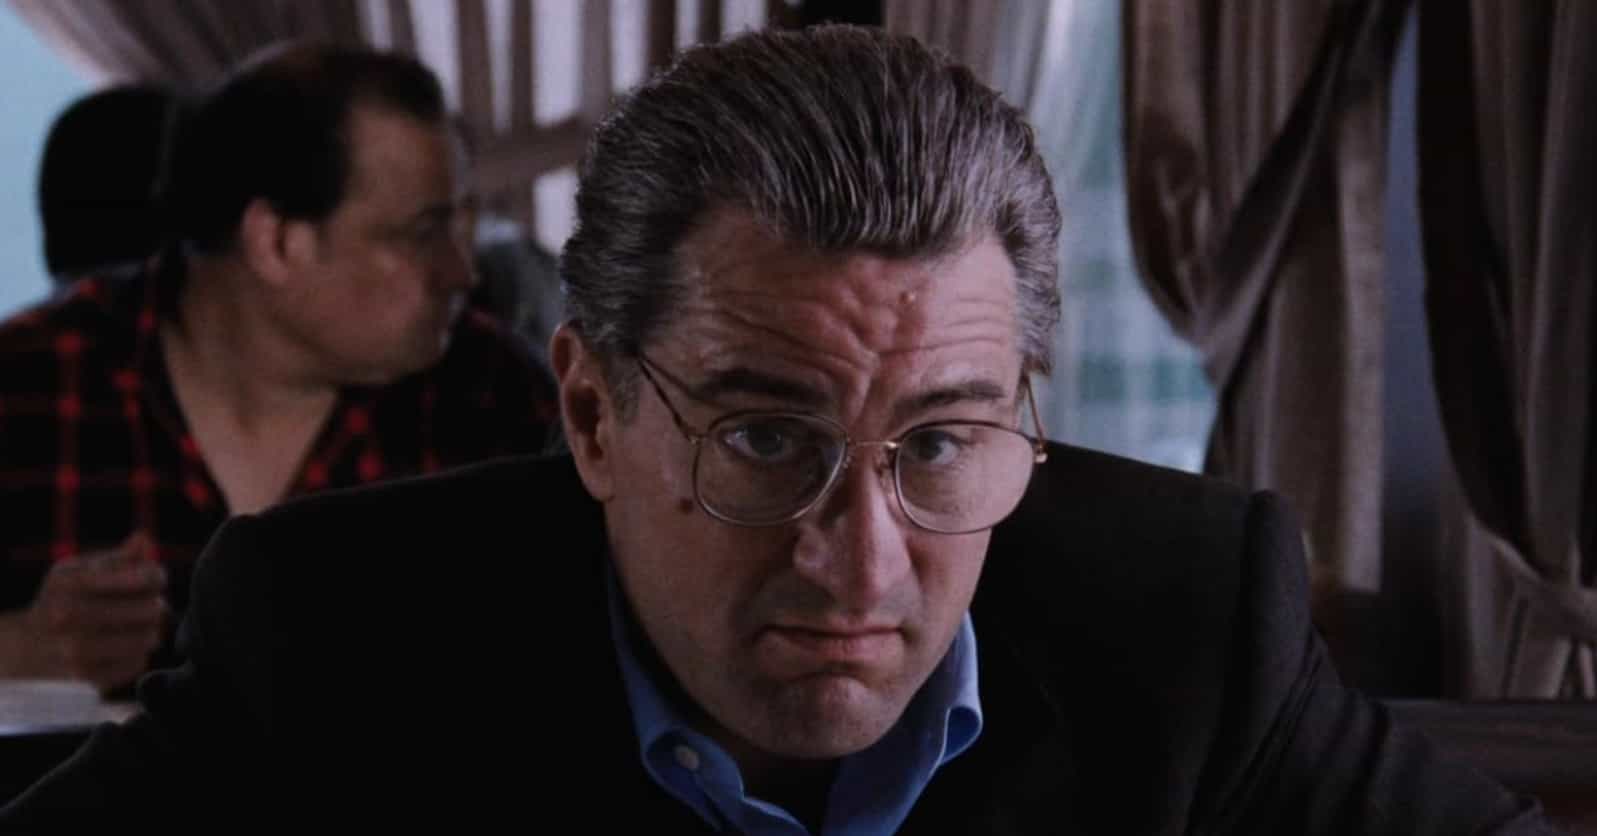 14 Robert De Niro Movies That Show Why He's The Godfather of Gangster Flicks